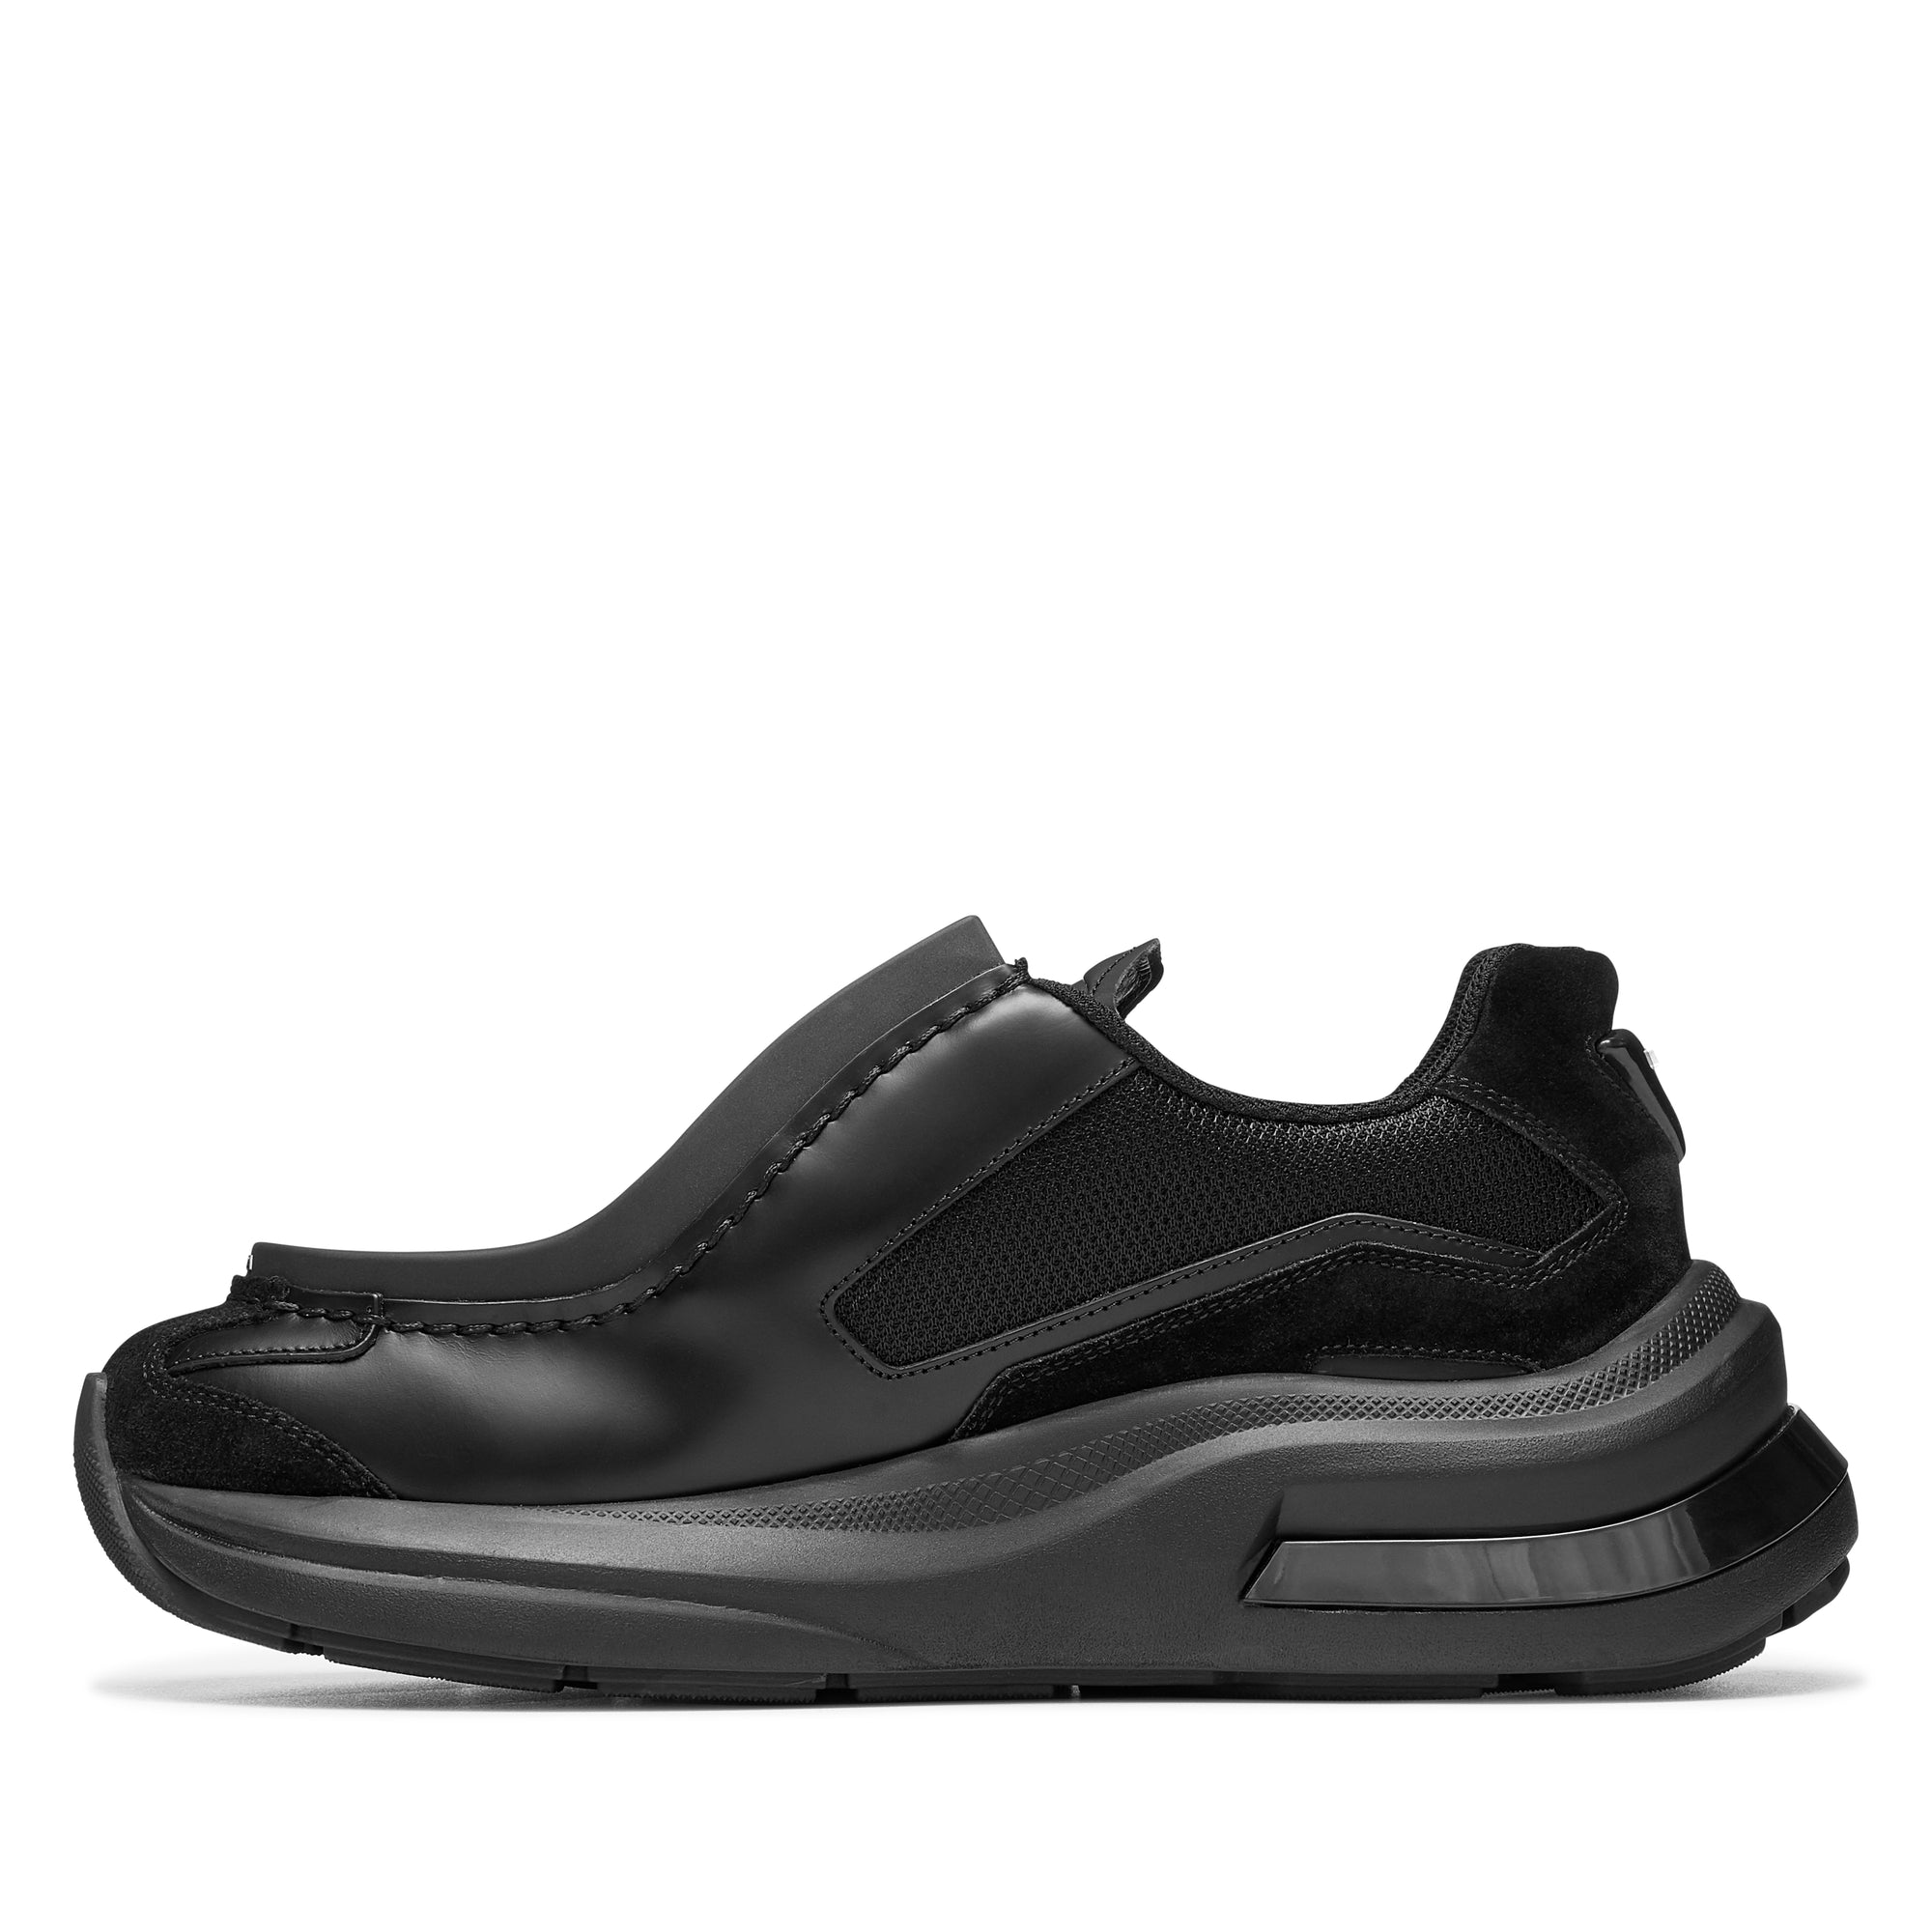 Prada - Men's Systeme Brushed Leather Sneakers - (Nero) view 2